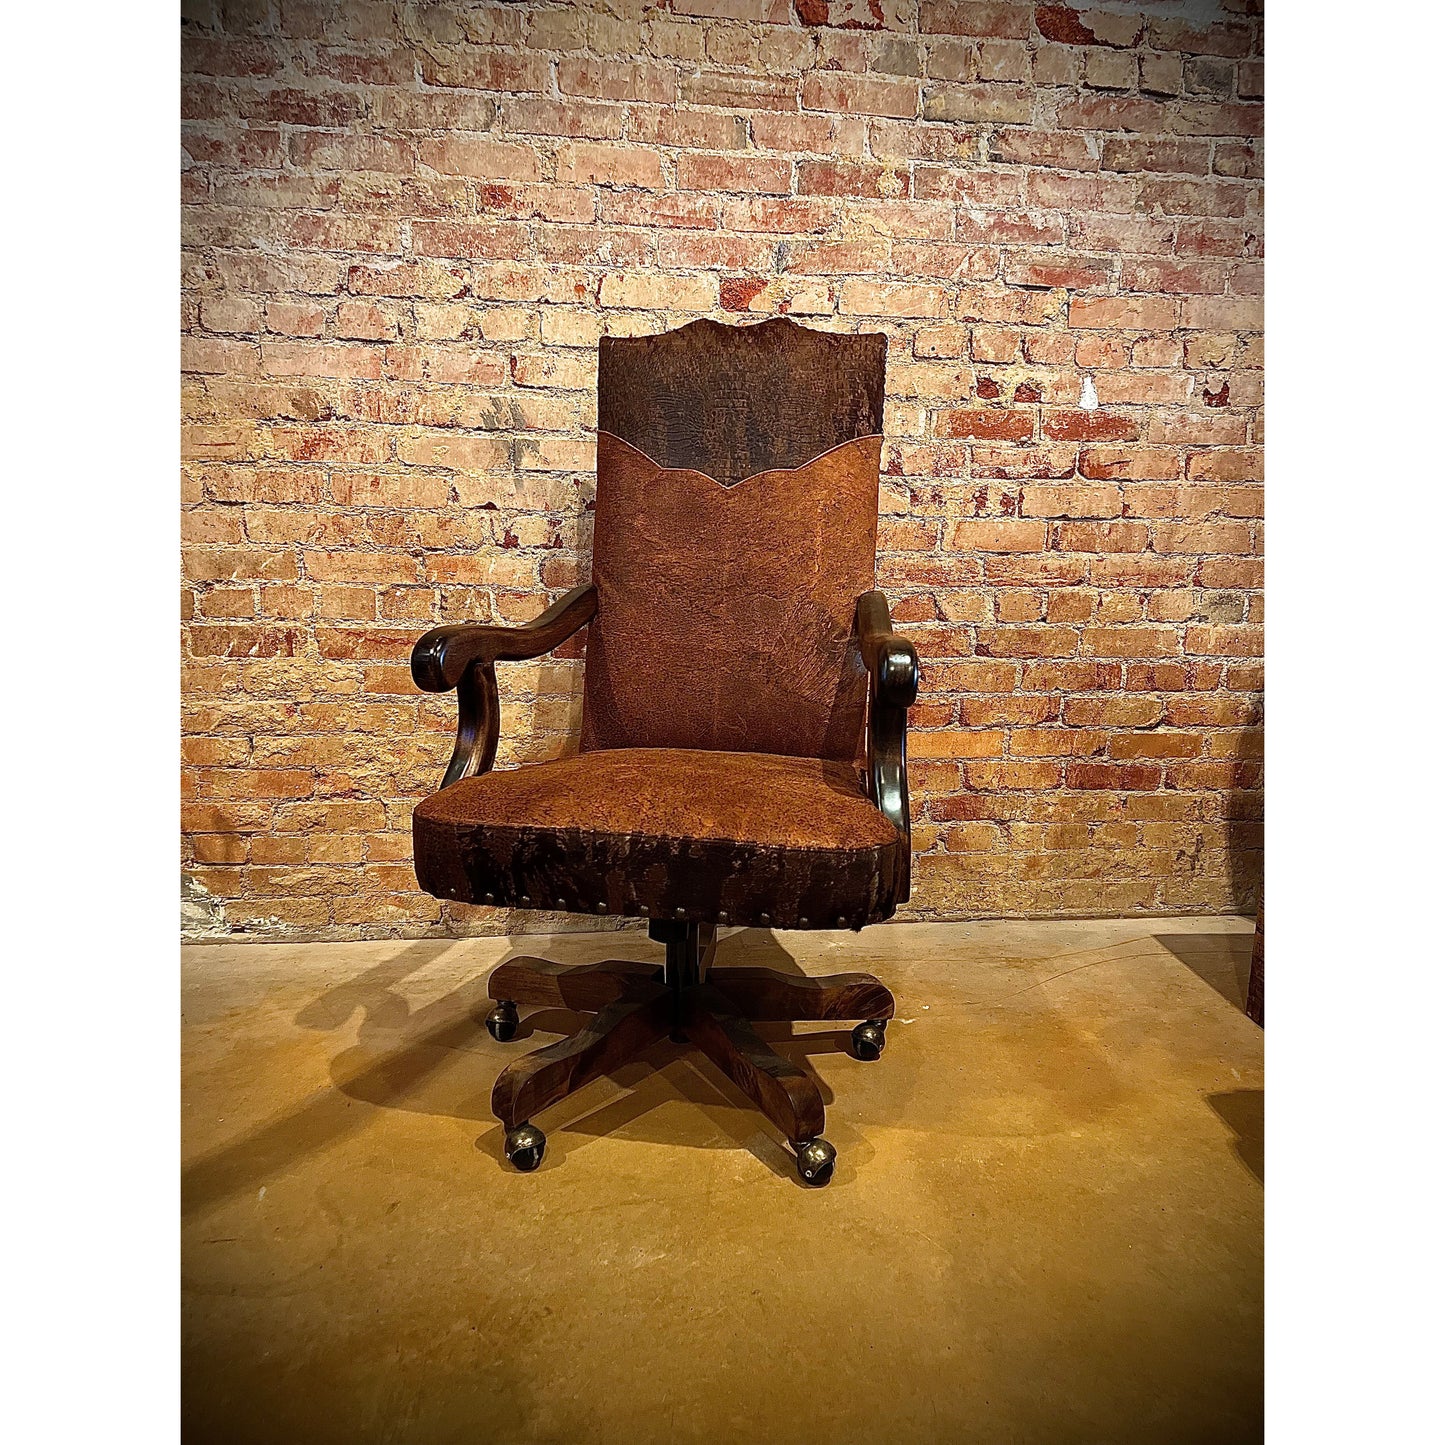 Expertly crafted with rough out leather and accented with acid wash croc, the Rough Out Chisum Desk Chair provides both style and comfort. Indulge in its luxurious design while staying supported throughout long days at your desk.